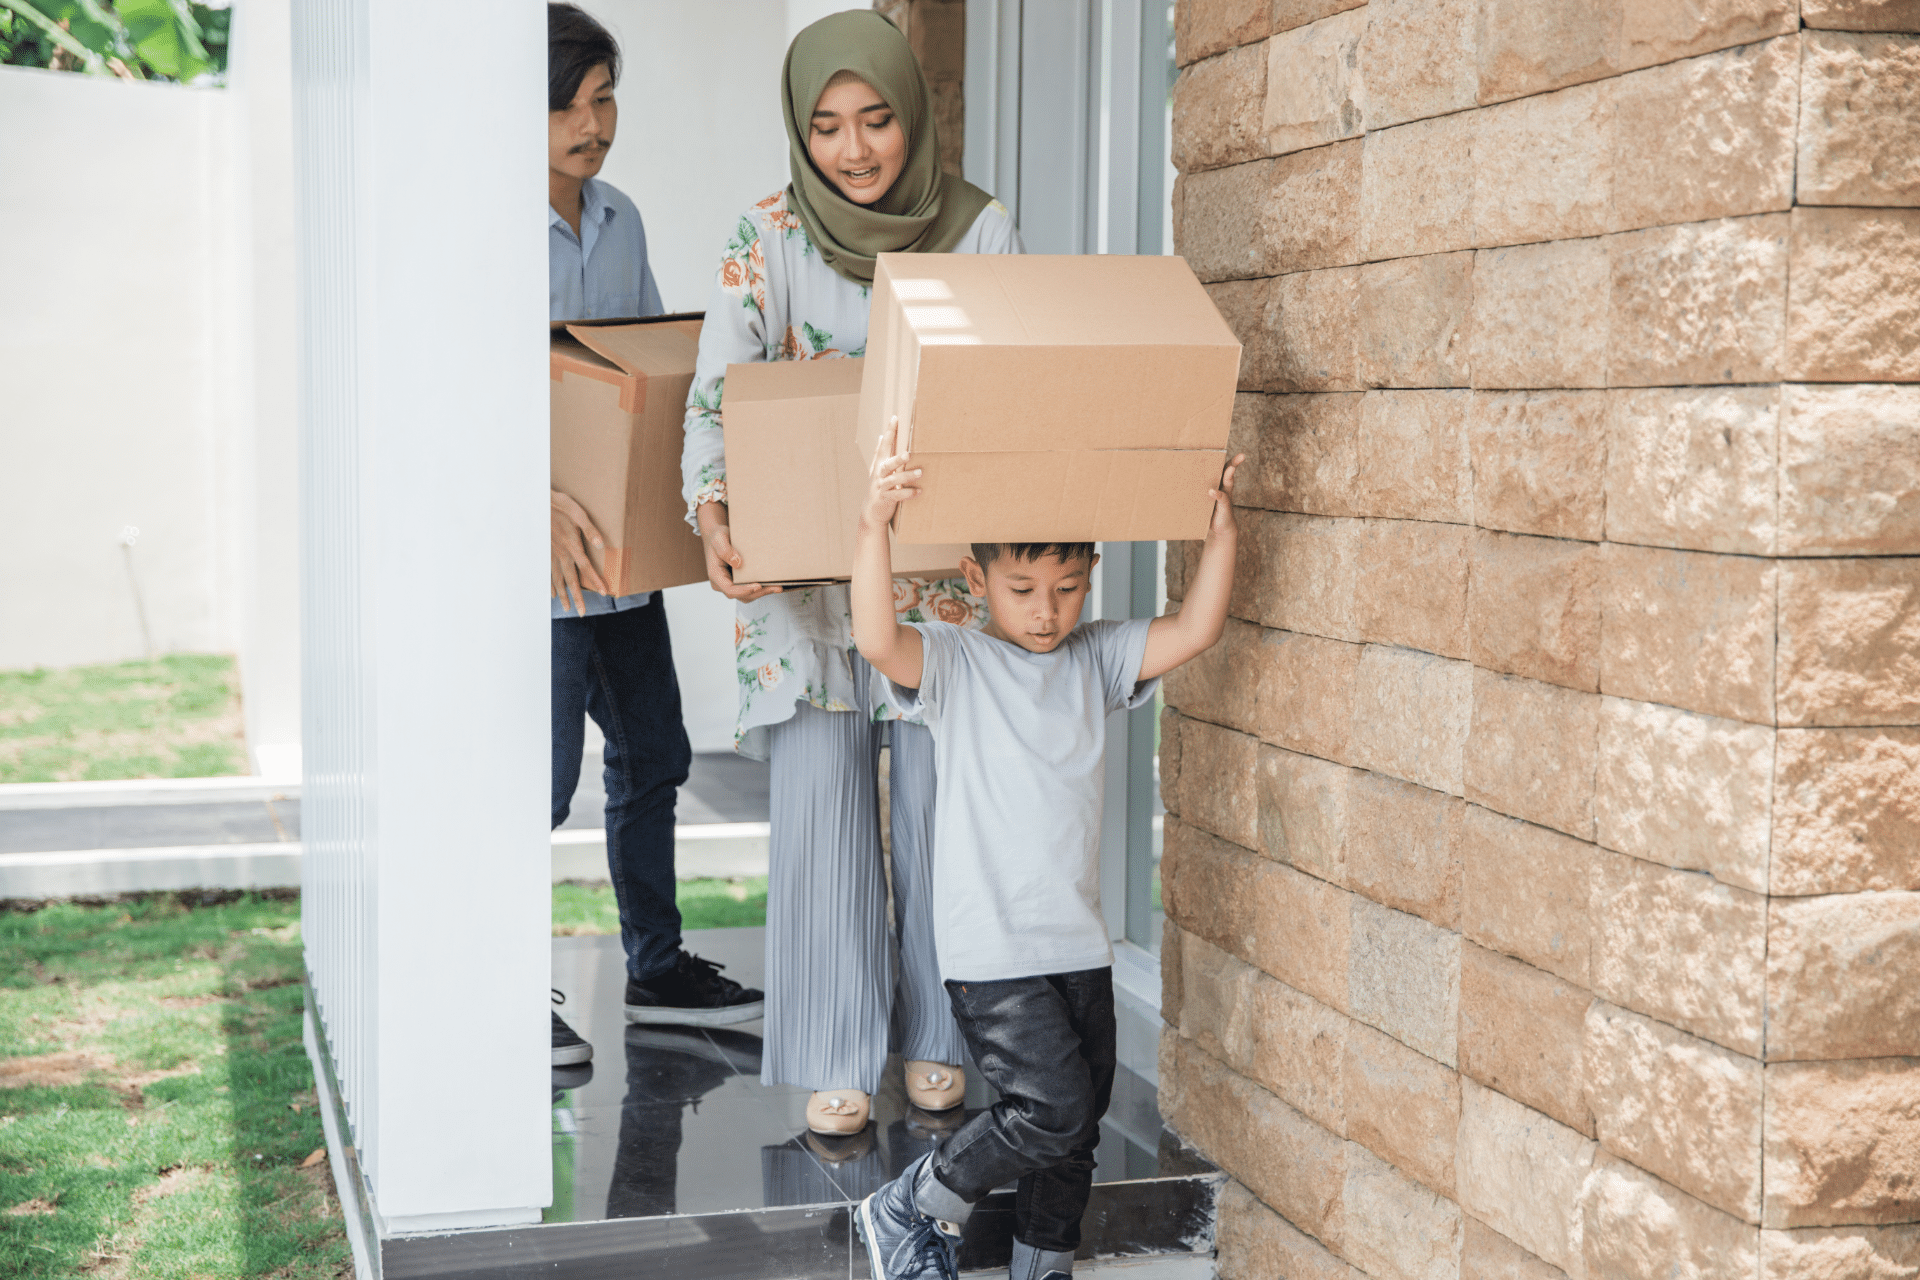 A picture of an immigrant family moving is used to illustrate how CLTS can be used to support immigrants